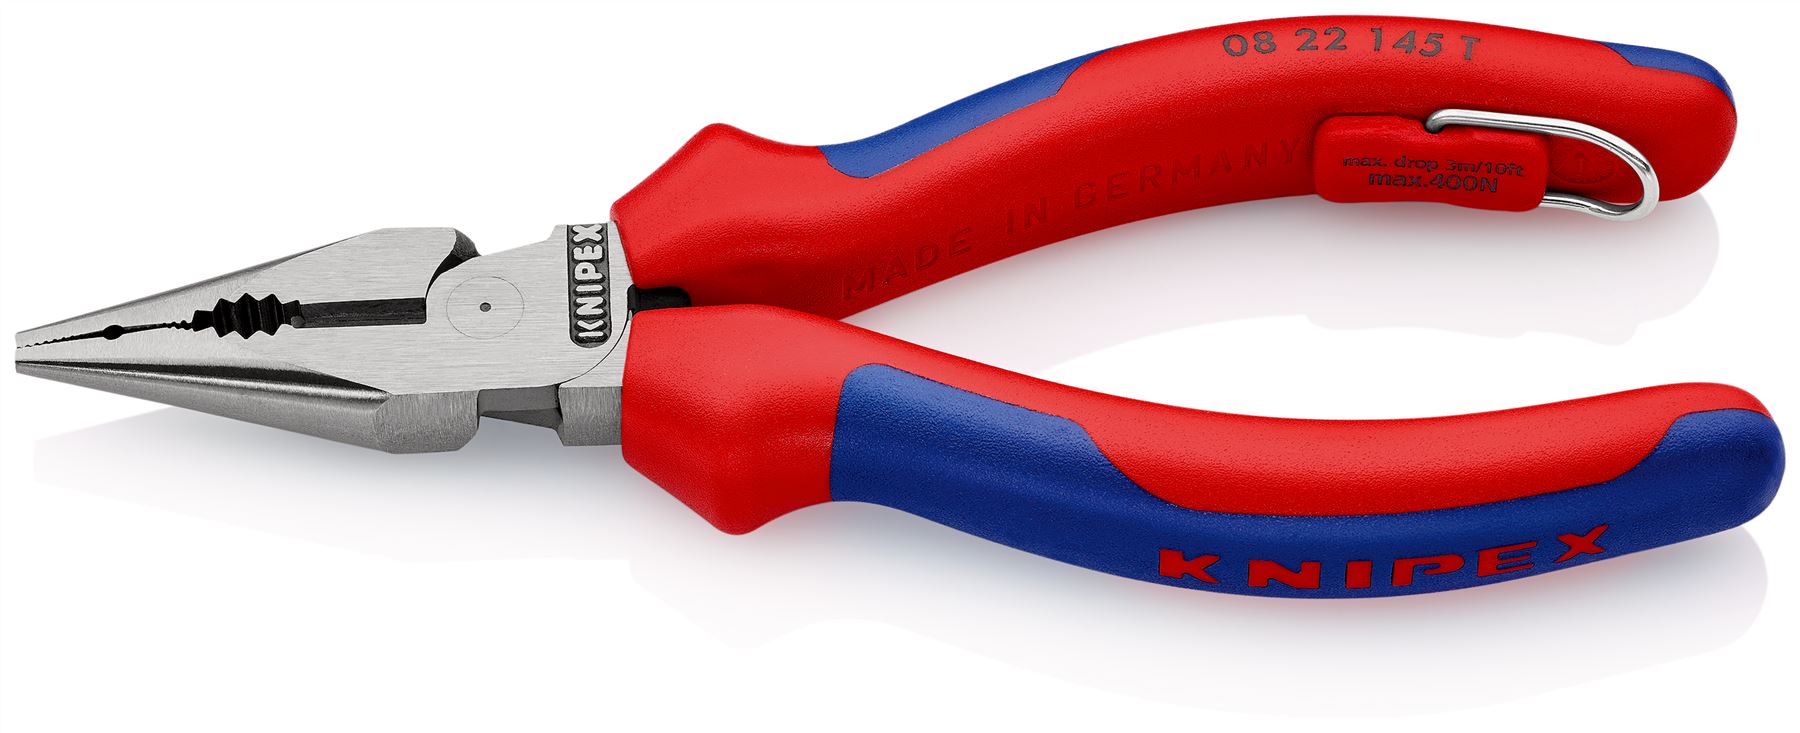 Knipex Needle Nose Combination Pliers 145mm Multi Component Grips with Tether Point 08 22 145 T